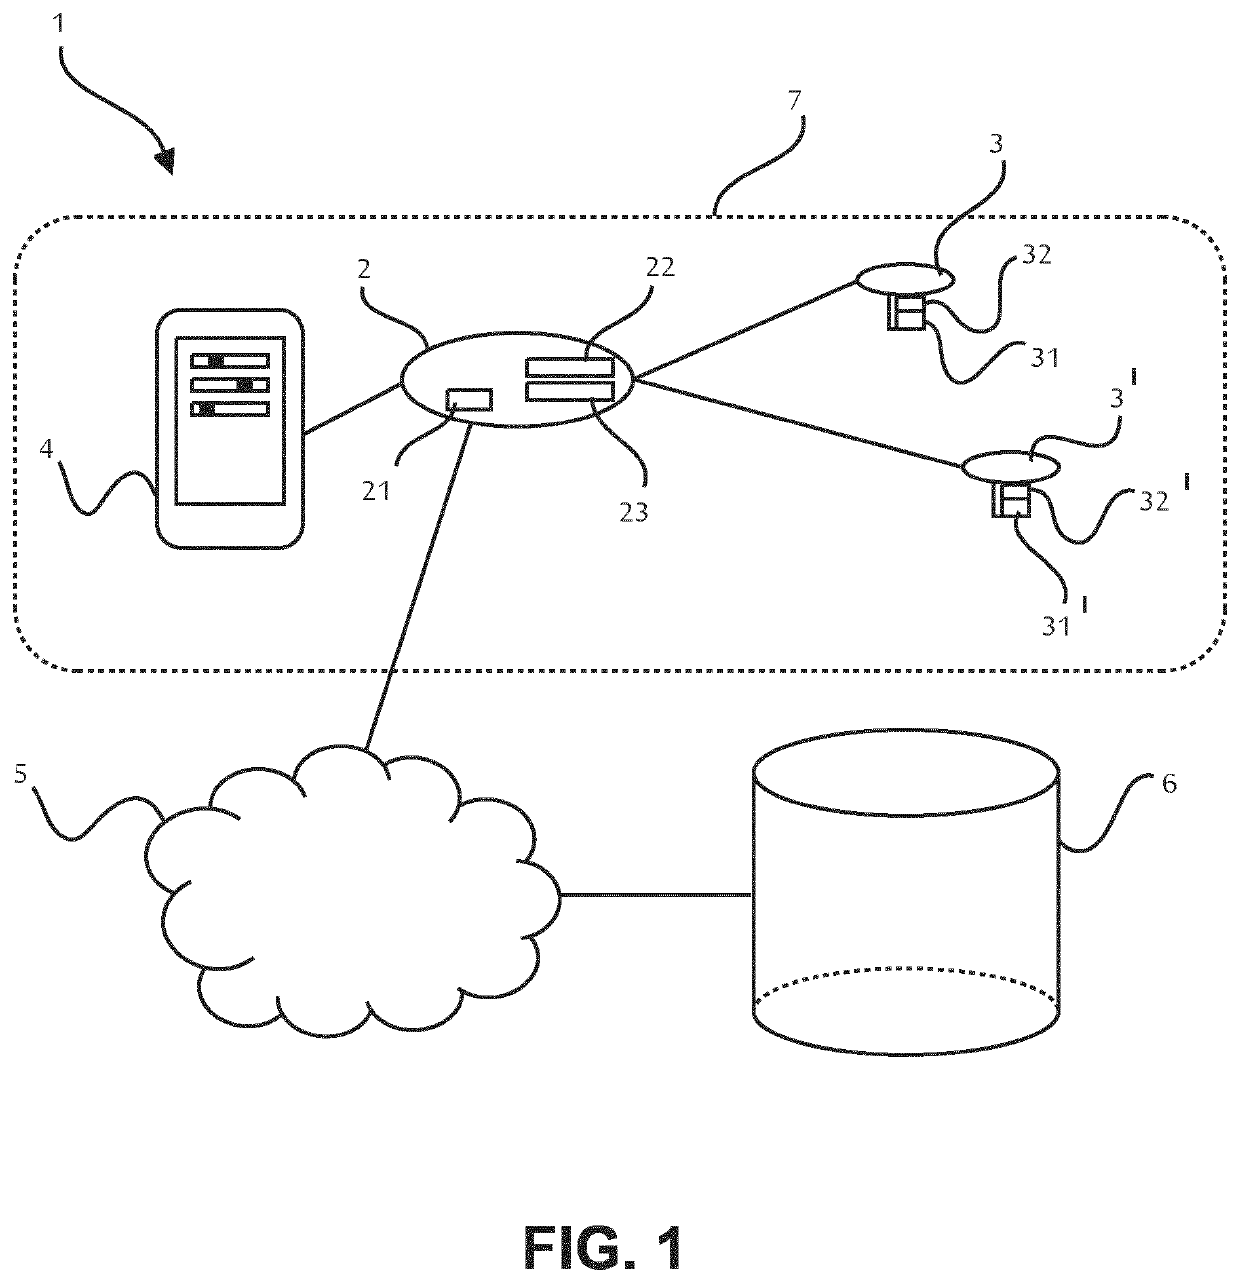 Monitoring and adjusting memory usage in connected device systems